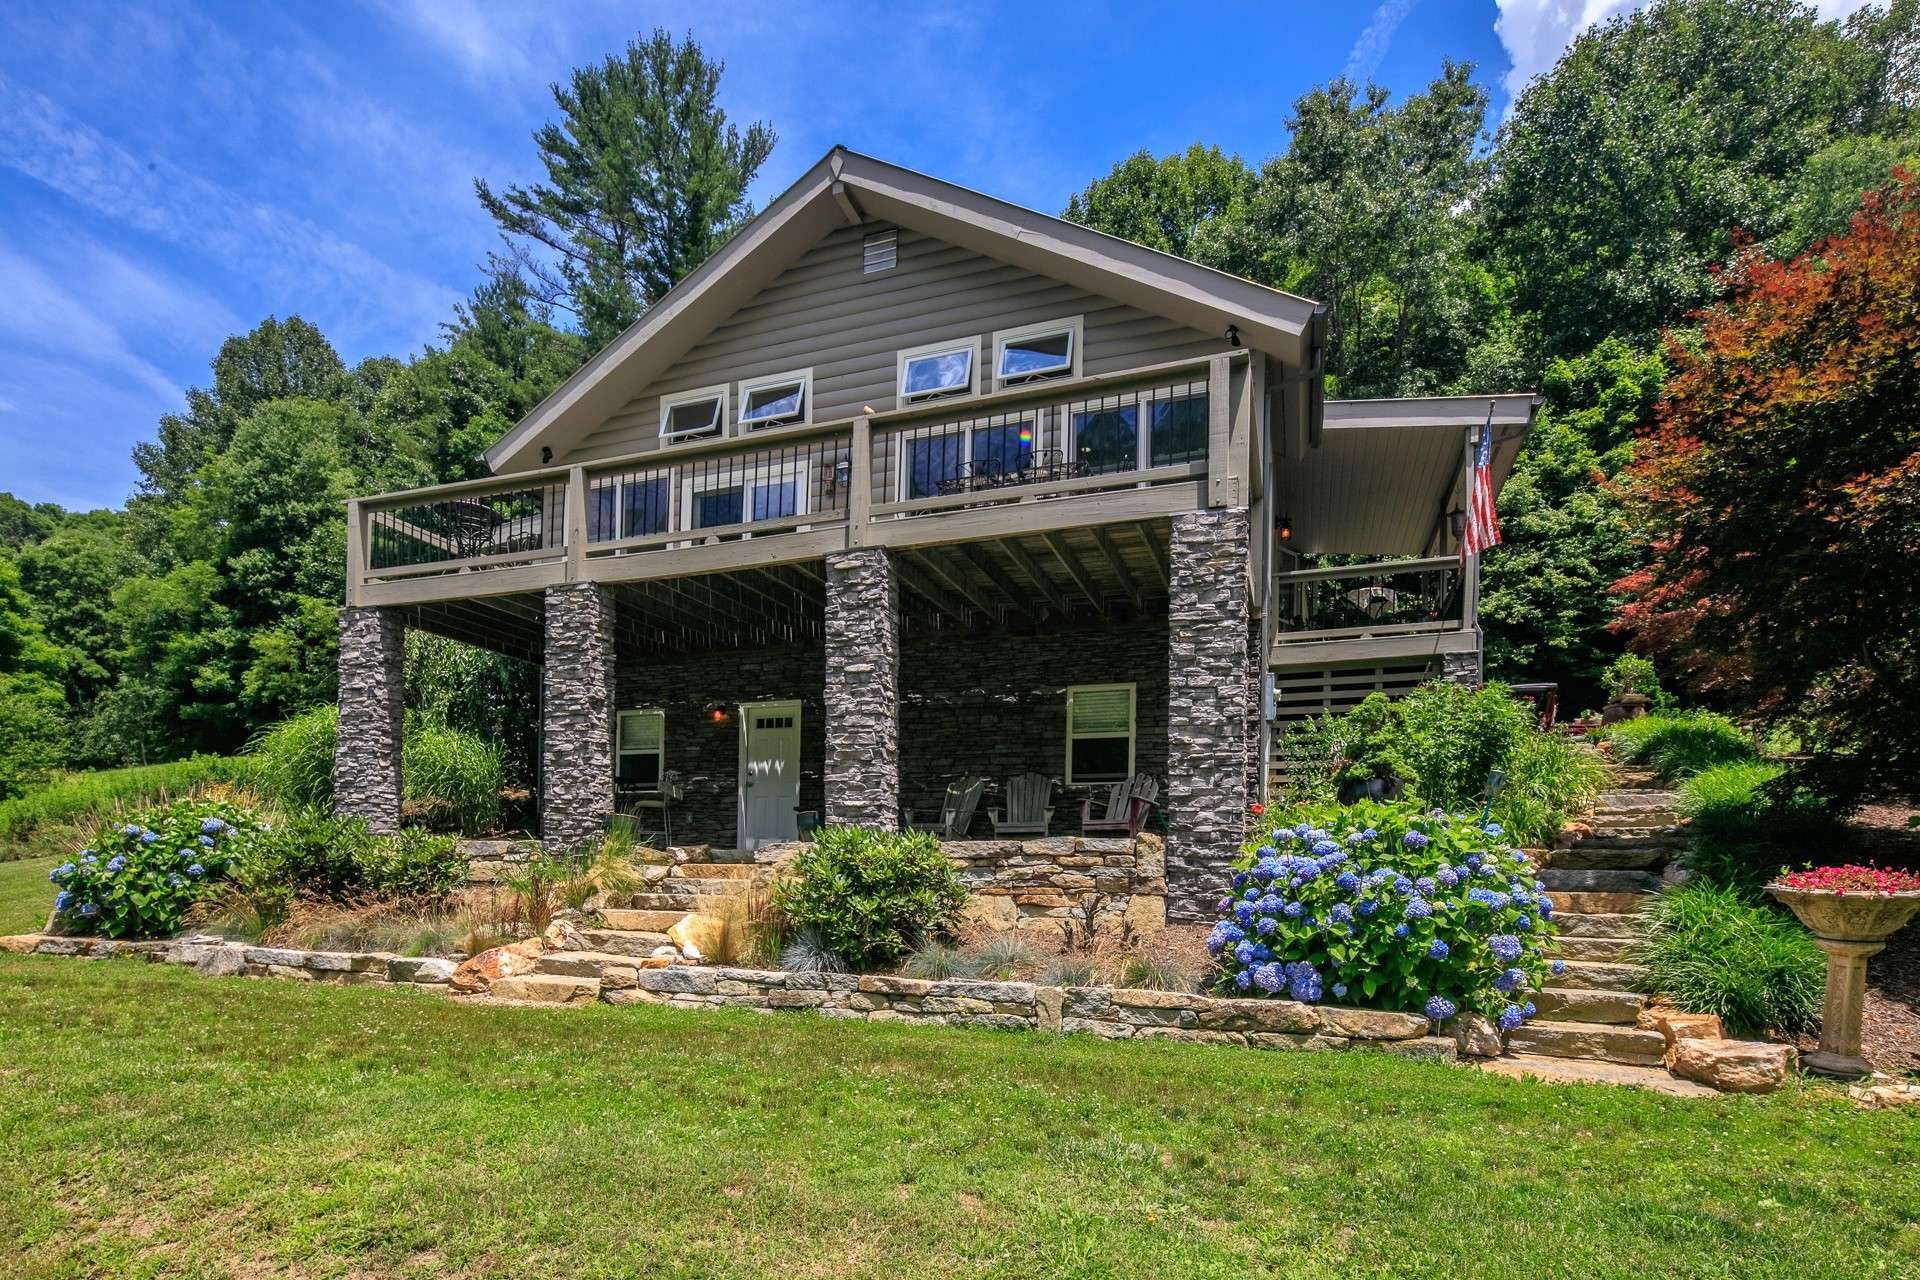 Offered at $465,000, this elegant mountain home with rustic accents and gorgeous 19 acre setting is ideal for your NC Mountain estate or weekend getaway.  Call today for additional information on listing R188.